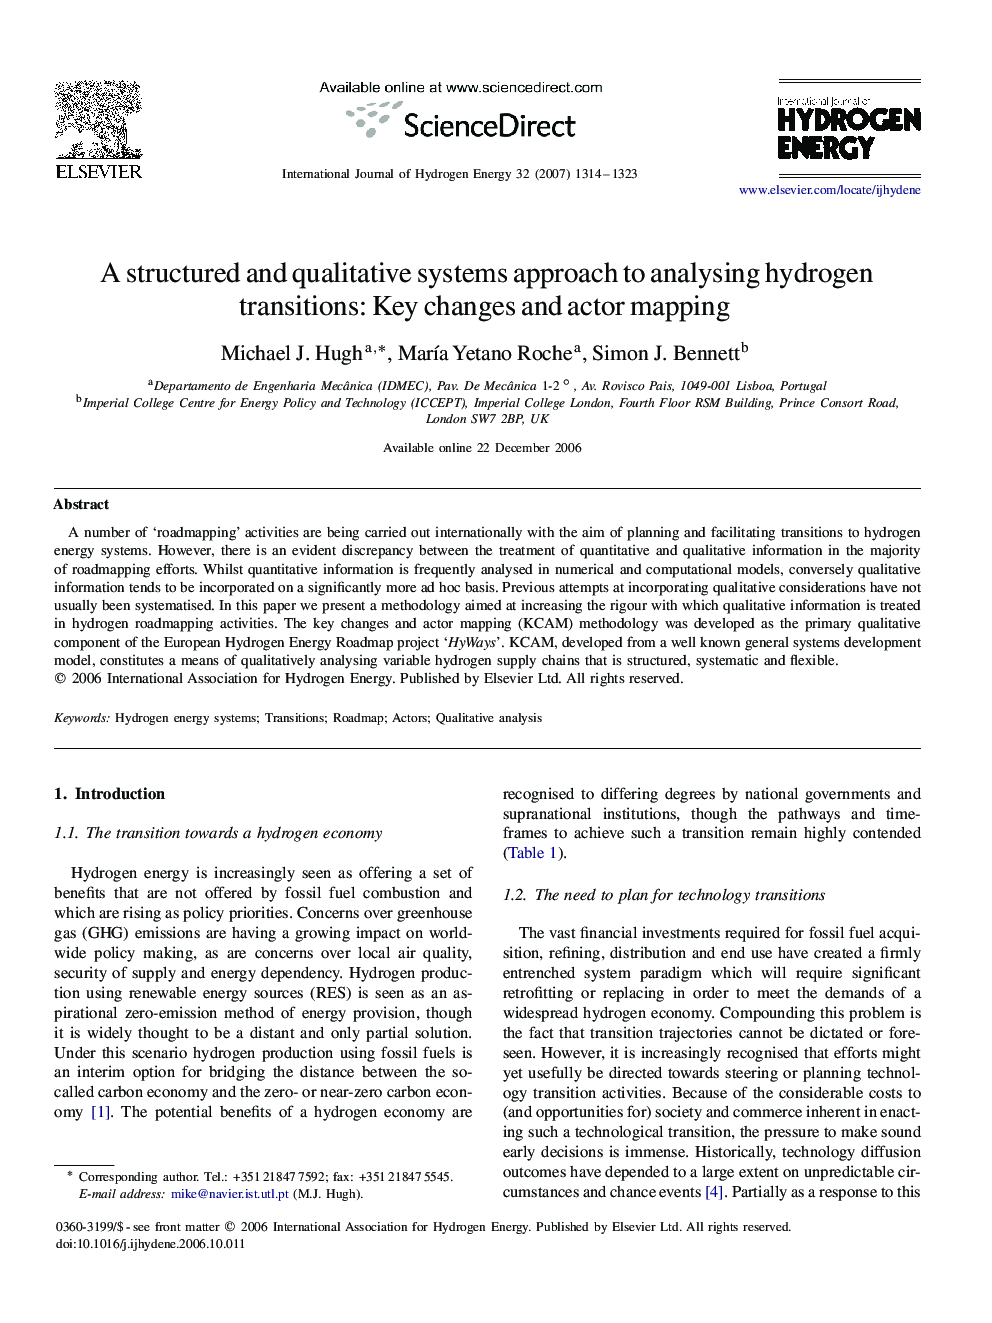 A structured and qualitative systems approach to analysing hydrogen transitions: Key changes and actor mapping